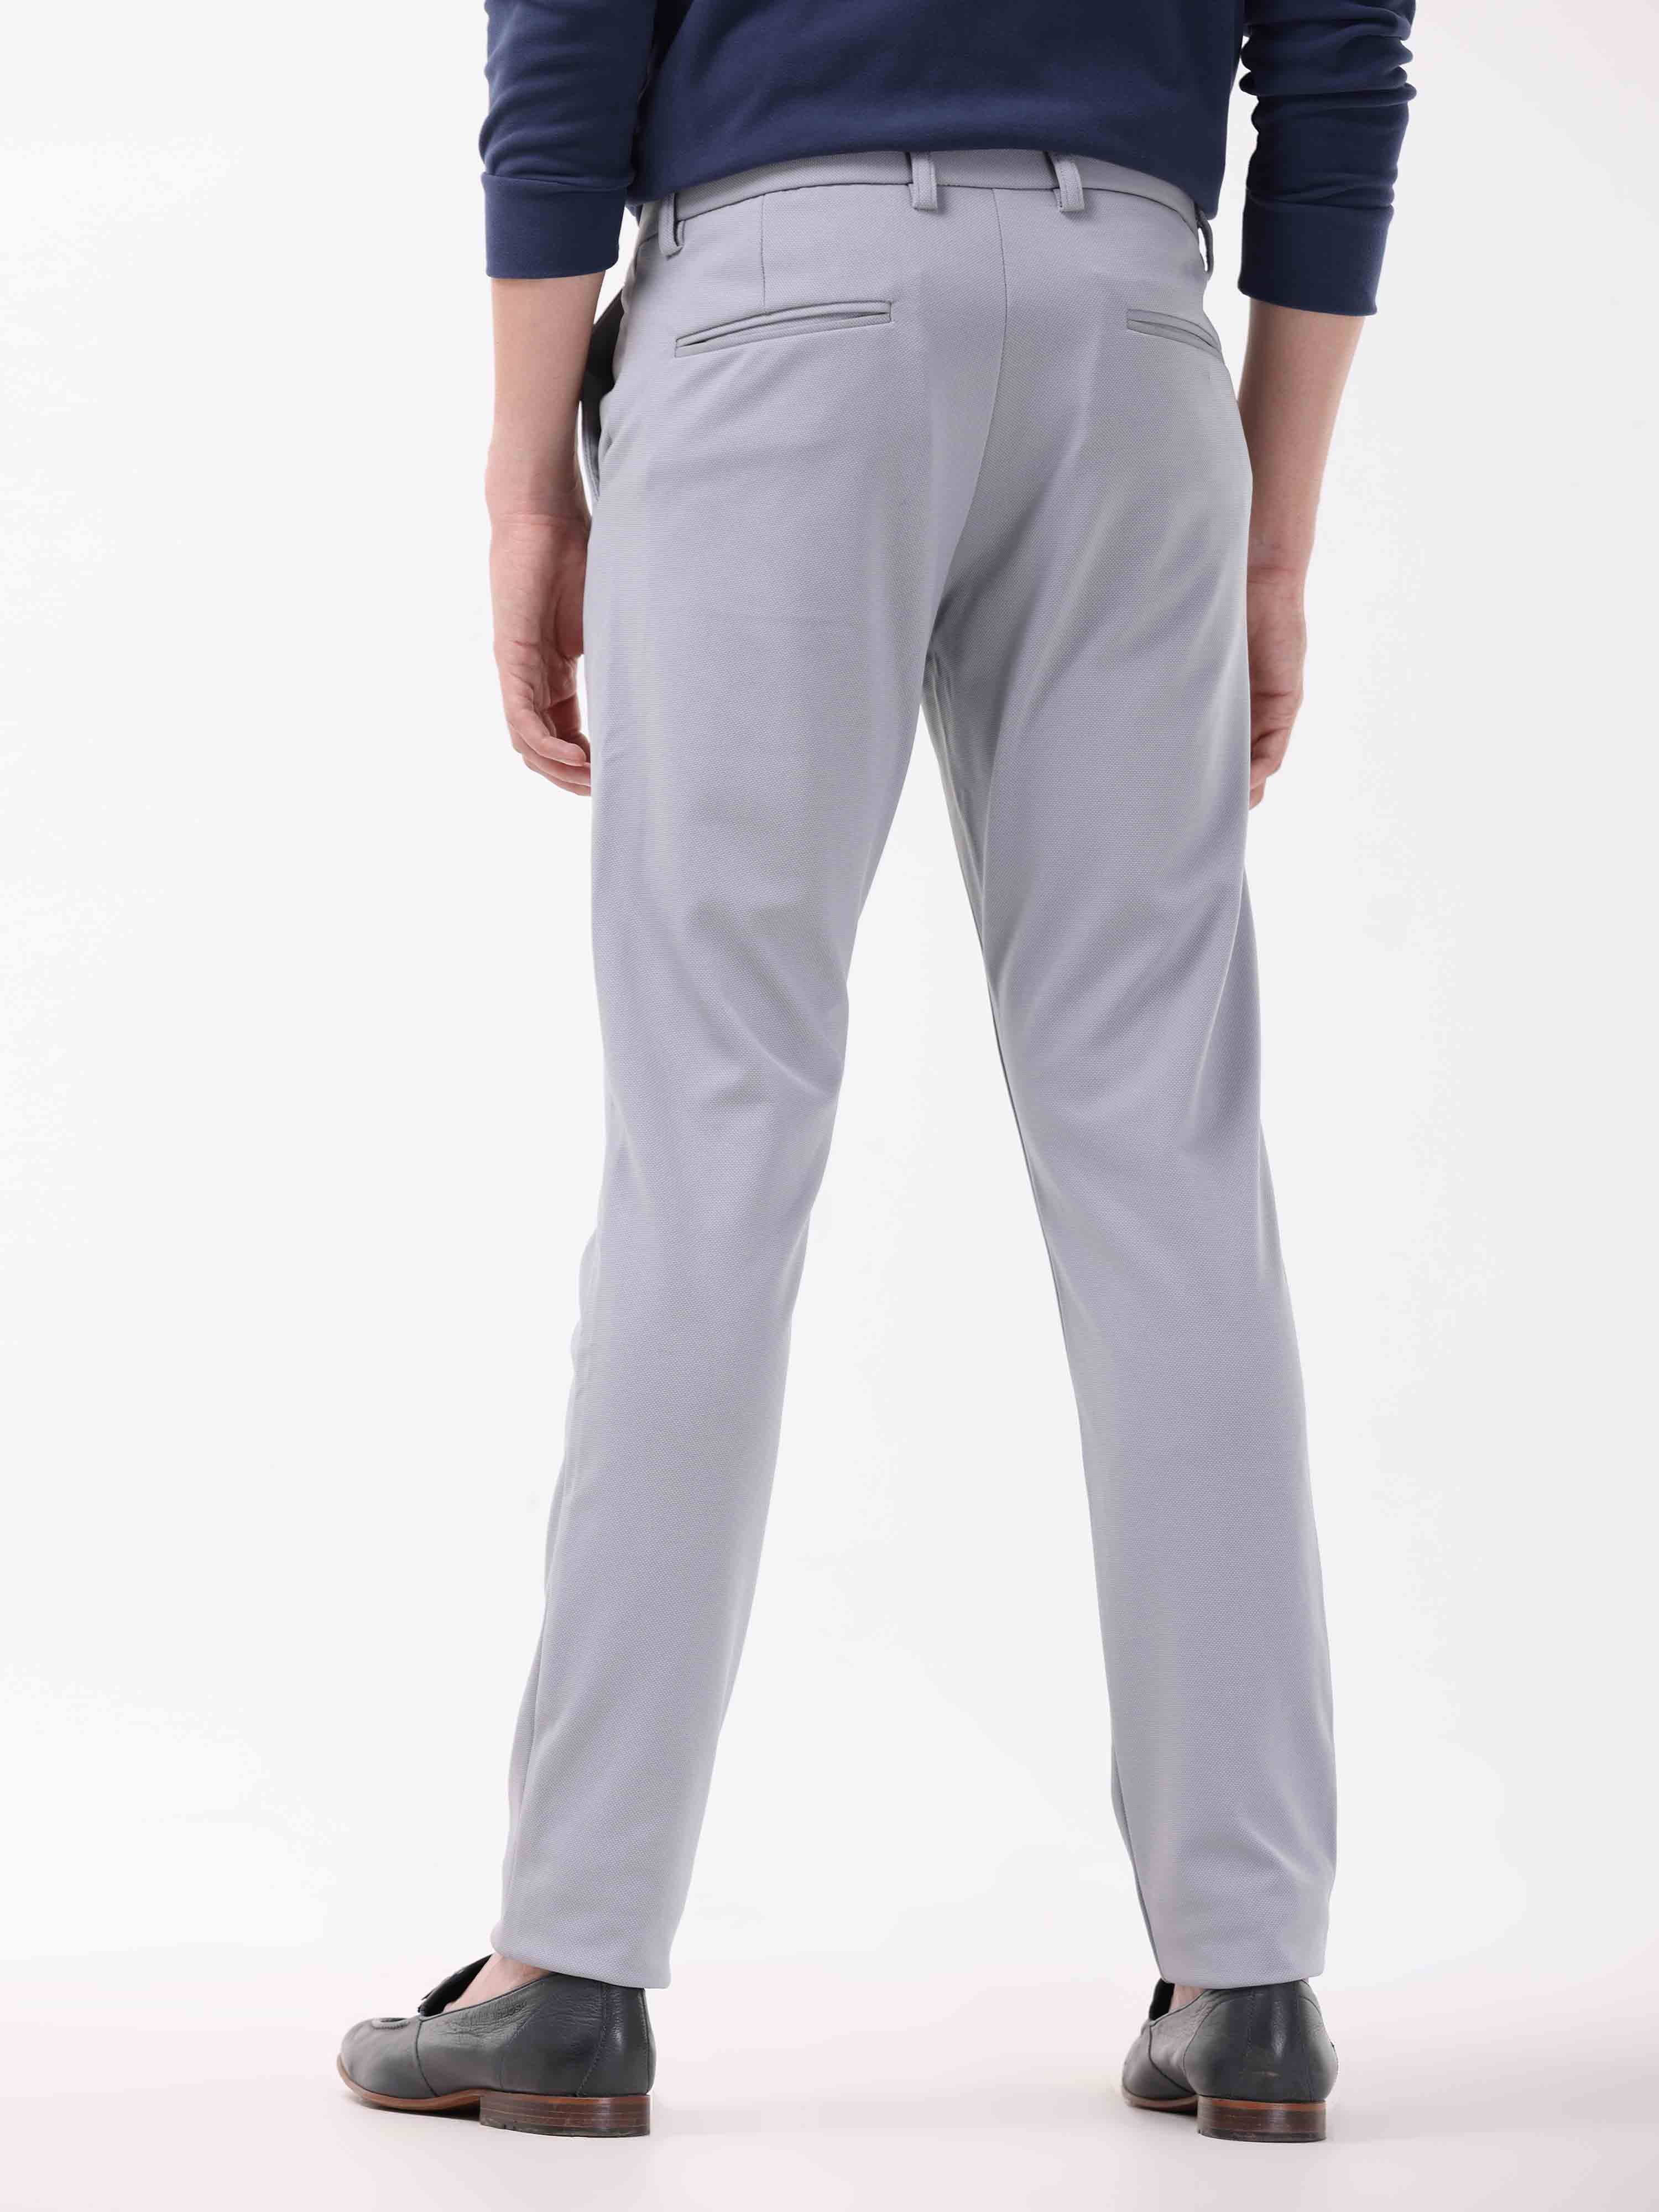 Buy Cool And Comfortable Grey Mens Stretch Pants Online